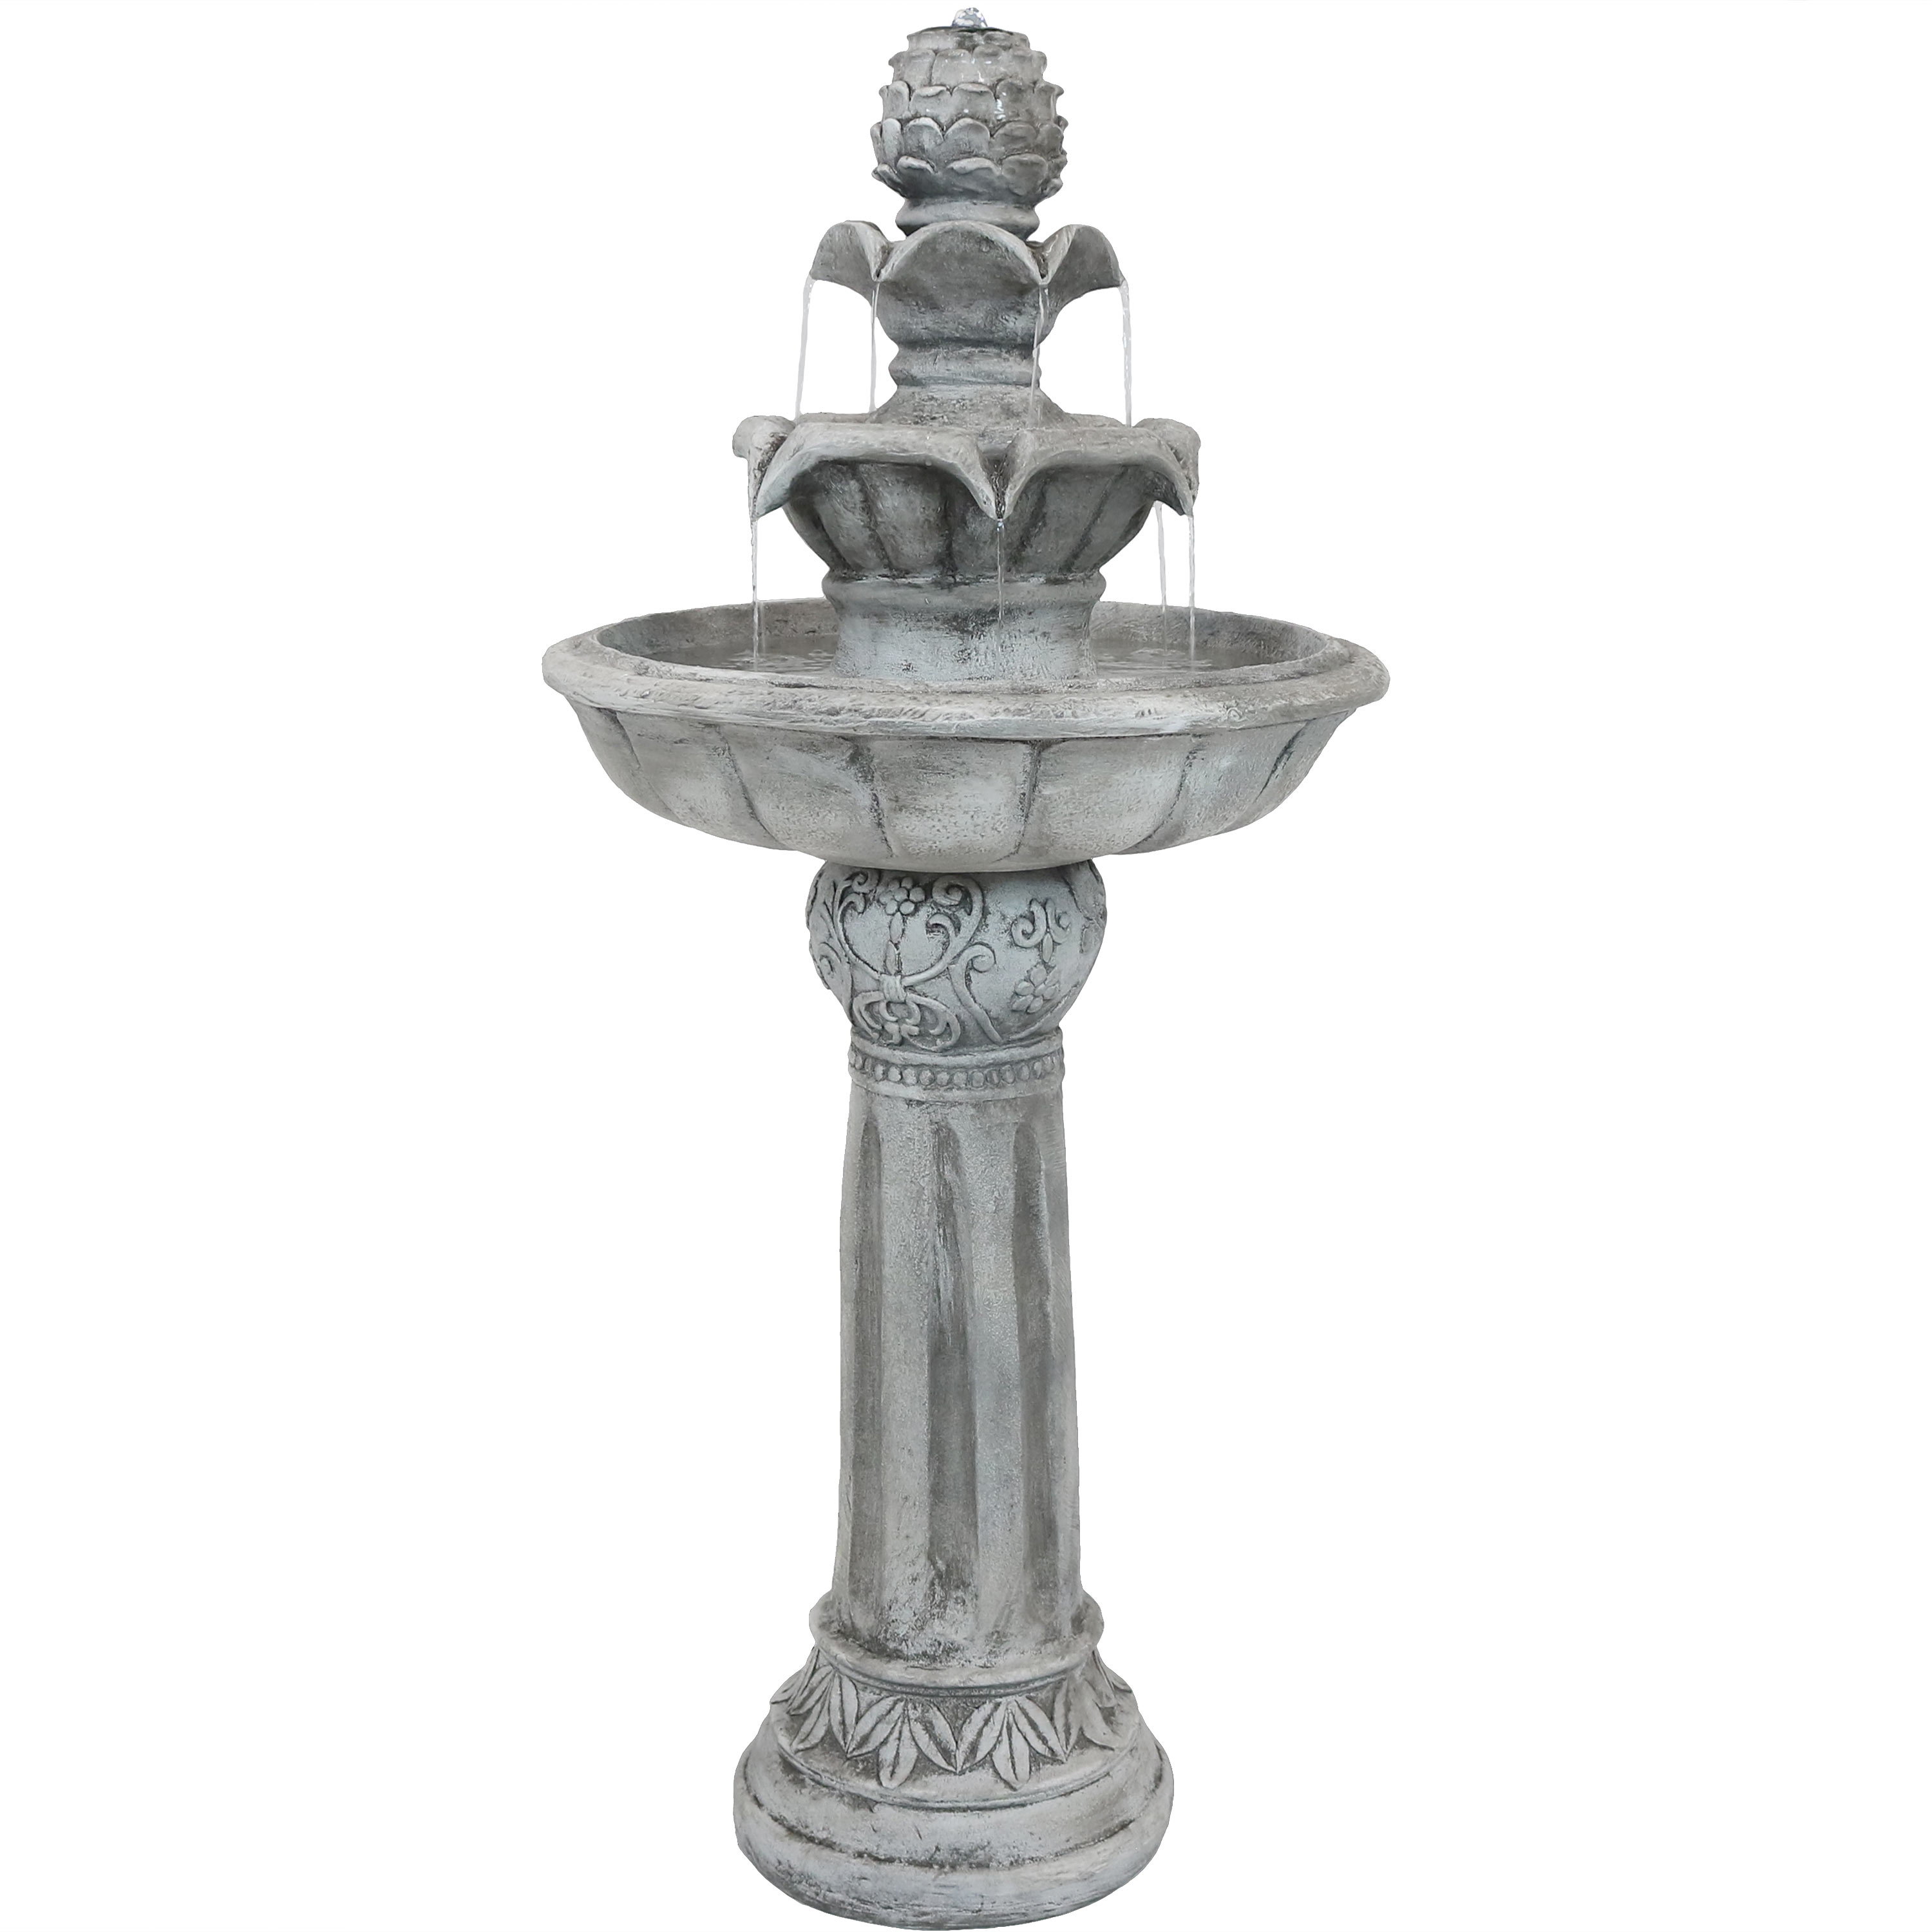 Sunnydaze Ornate Elegance Tiered Outdoor Solar Water Fountain with Battery Backup & LED Light, 42-Inch, White